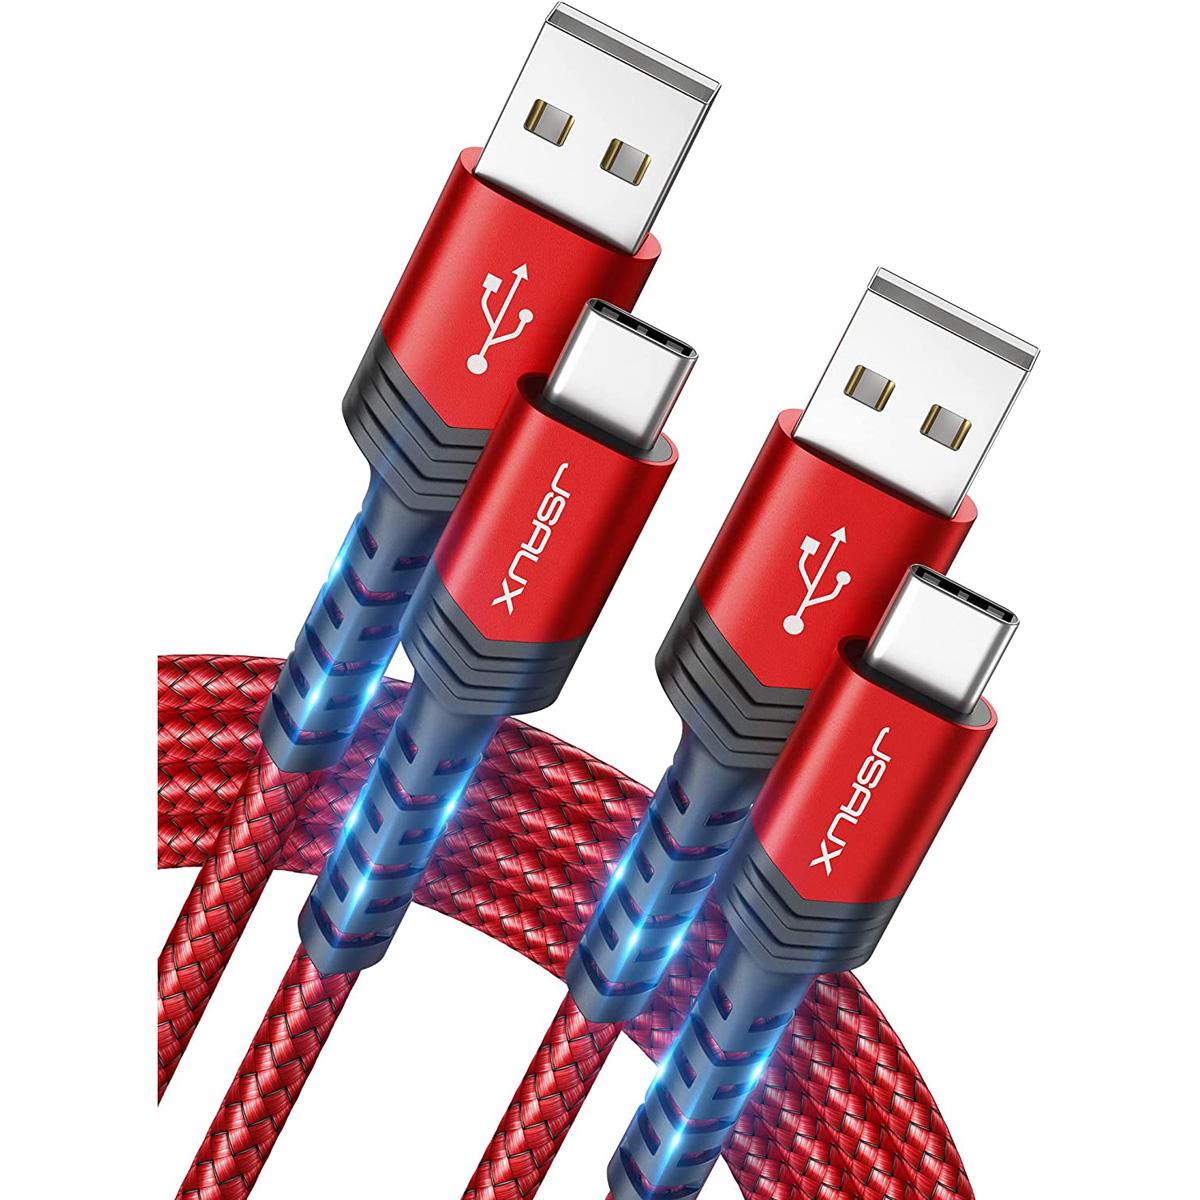 JSAUX USB-C to USB-A Braided Charging Cables 2 Pack for $5.24